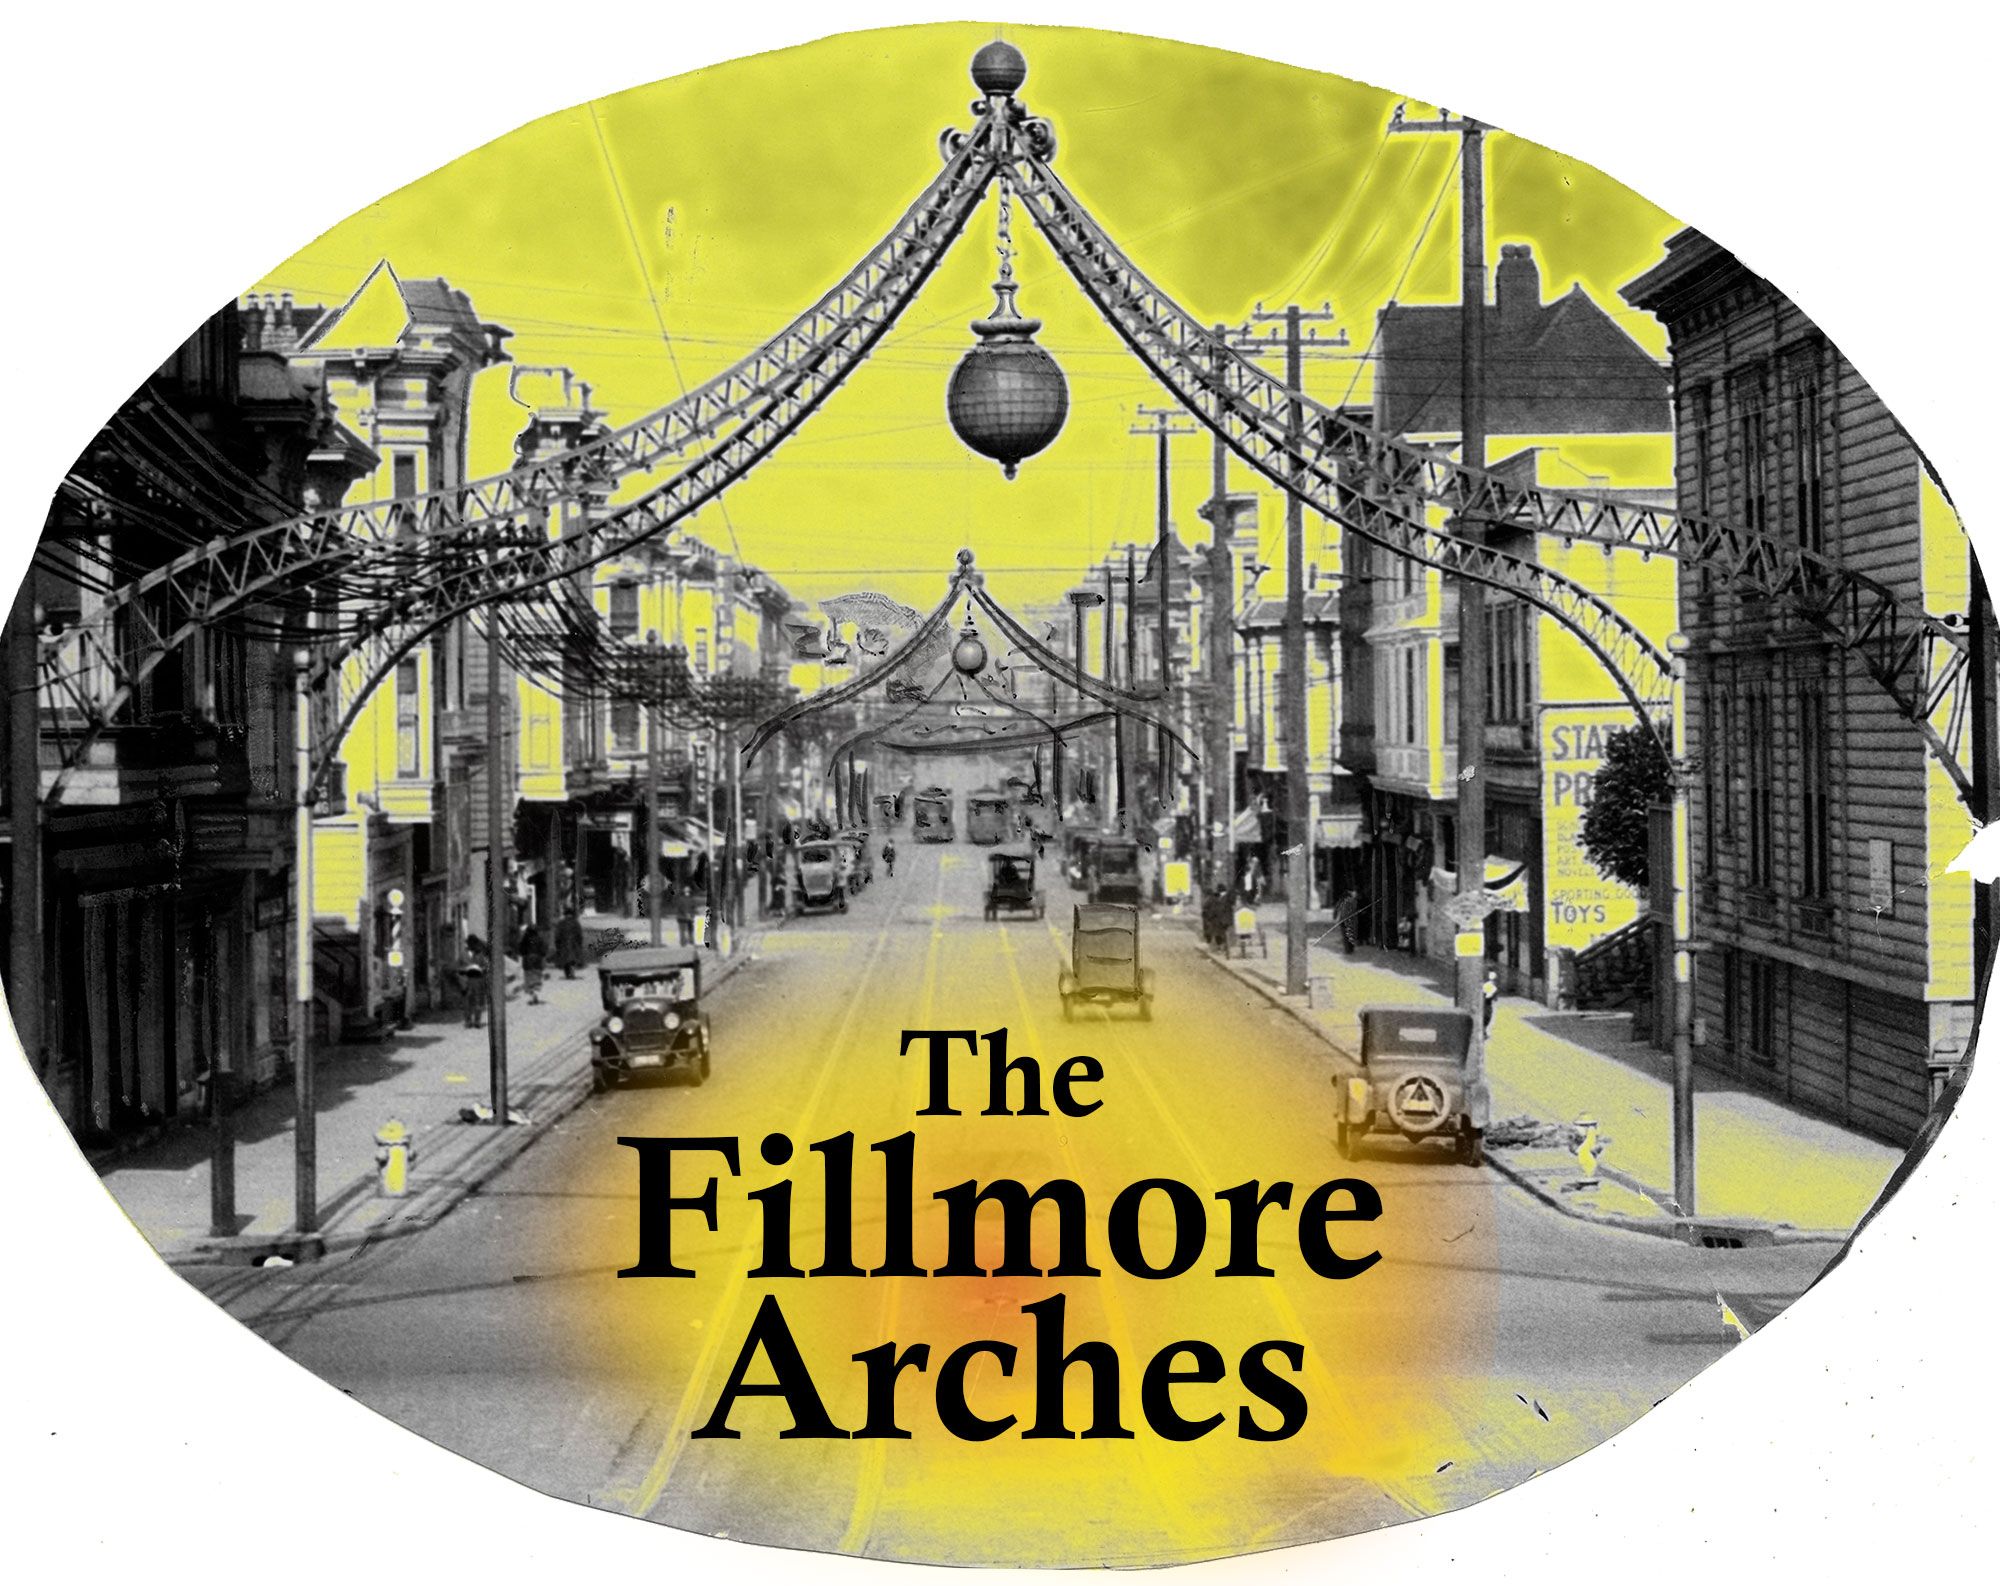 View of arches on Fillmore Street